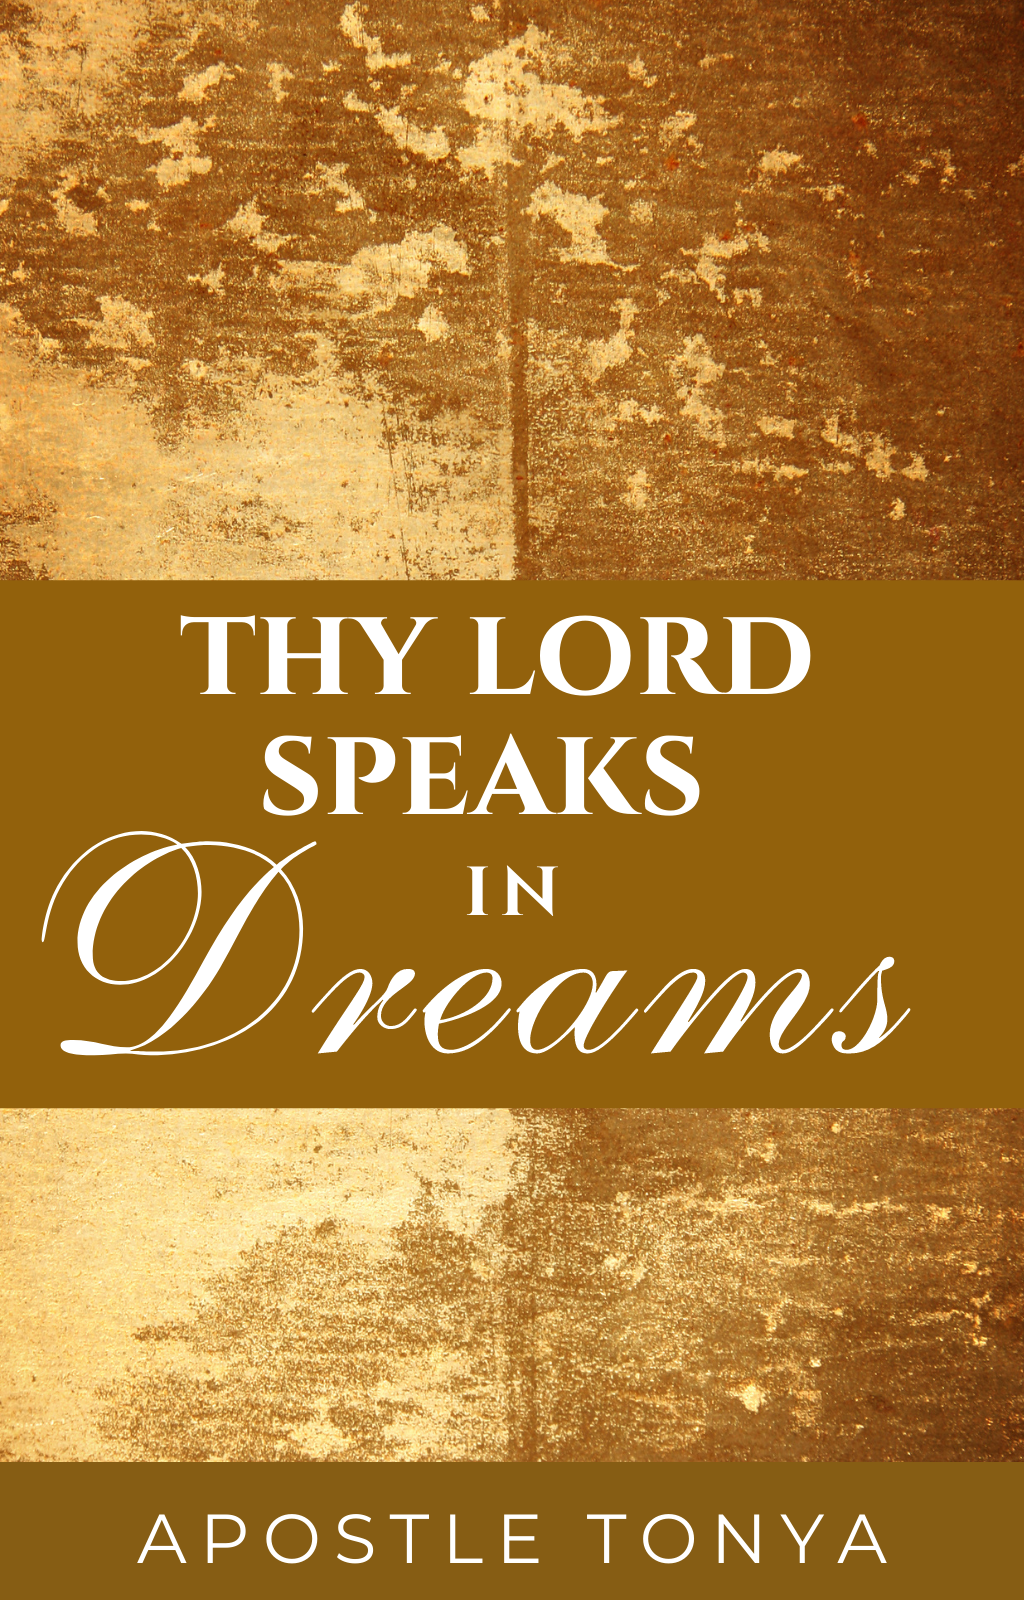 Honoring Dreams from God